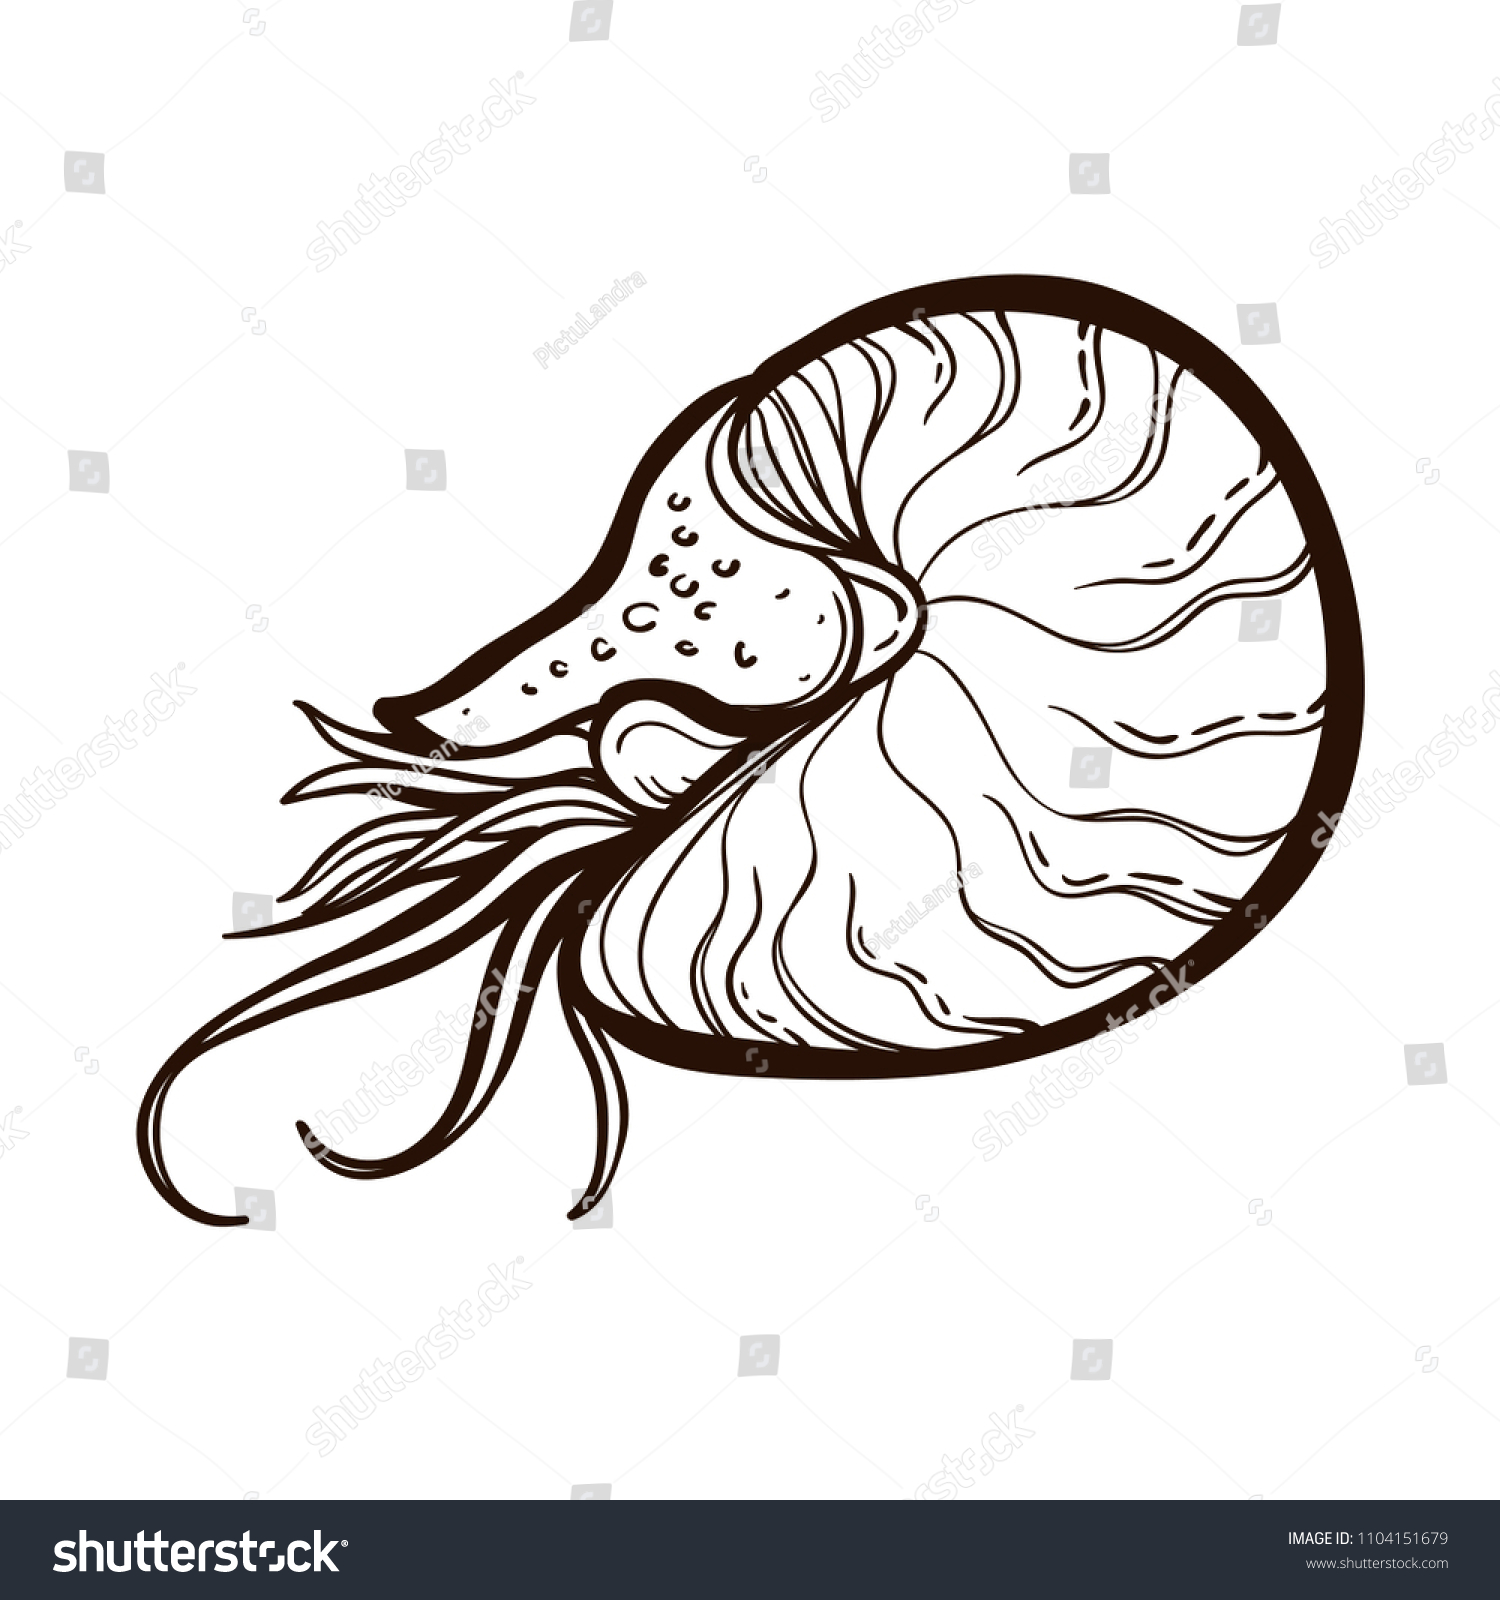 SVG of Chambered Nautilus (Nautilus Pompilius) isolated on white background. Pearly shell ocean mollusk. Cephalopods with a prominent head and tentacle. Coloring book for adults svg